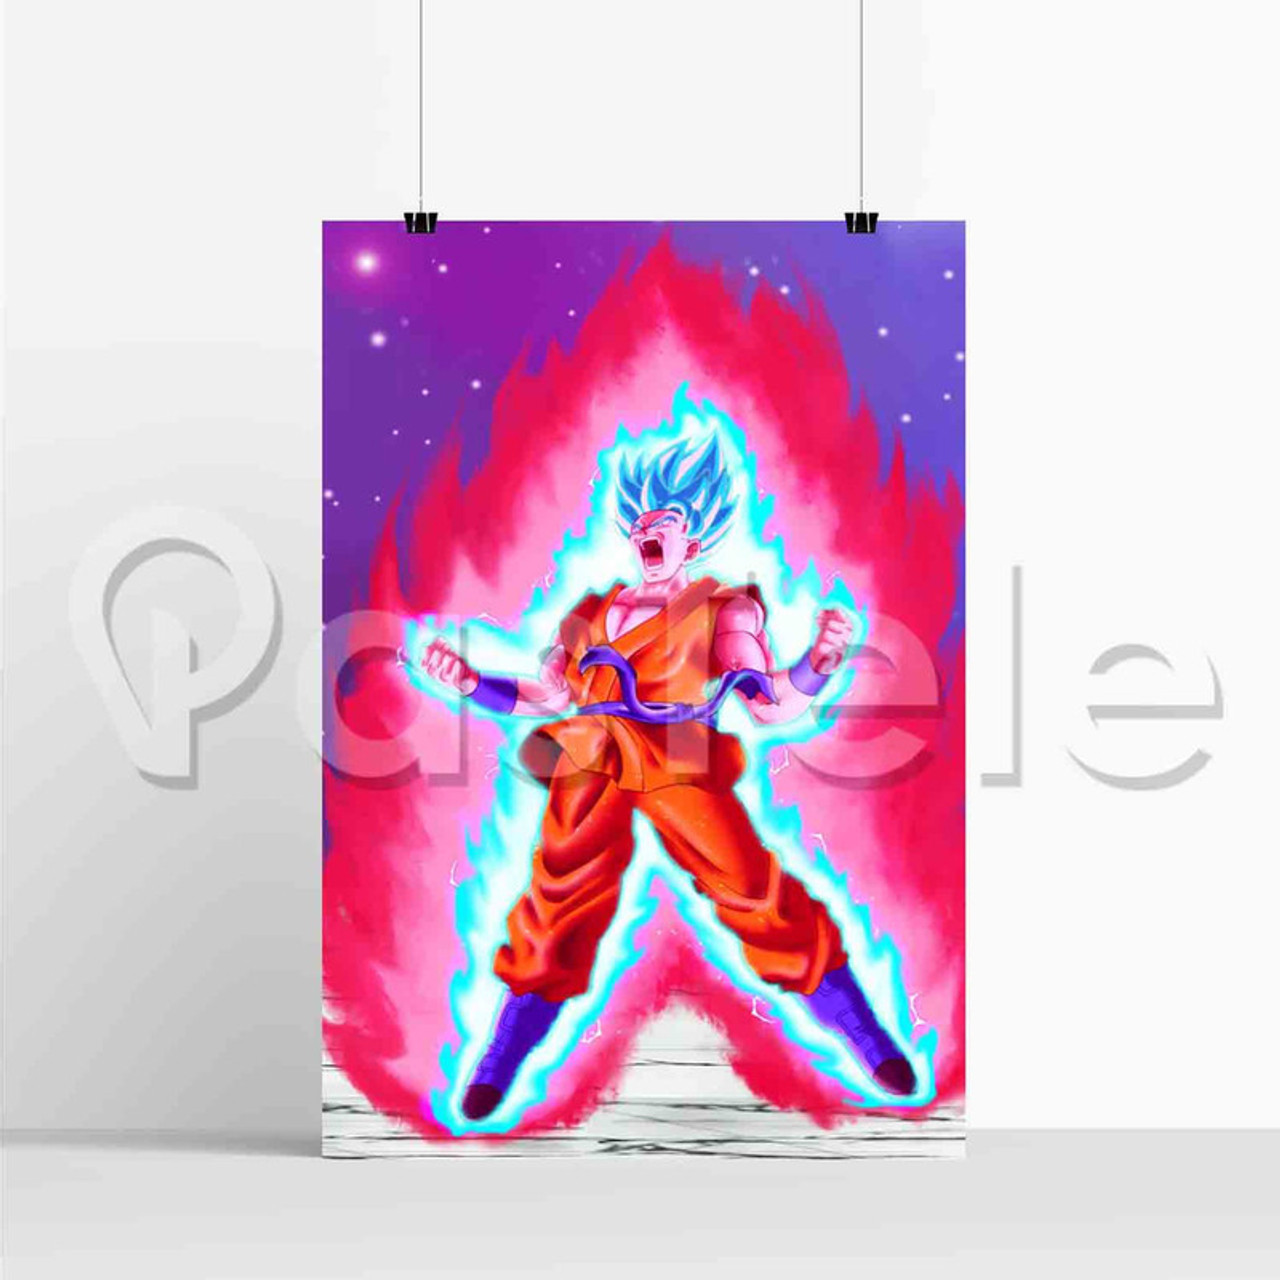 Goku Super Sayajin Blue! 😁 (My 3rd) How to frame it and put it on the  wall? : r/Tufting